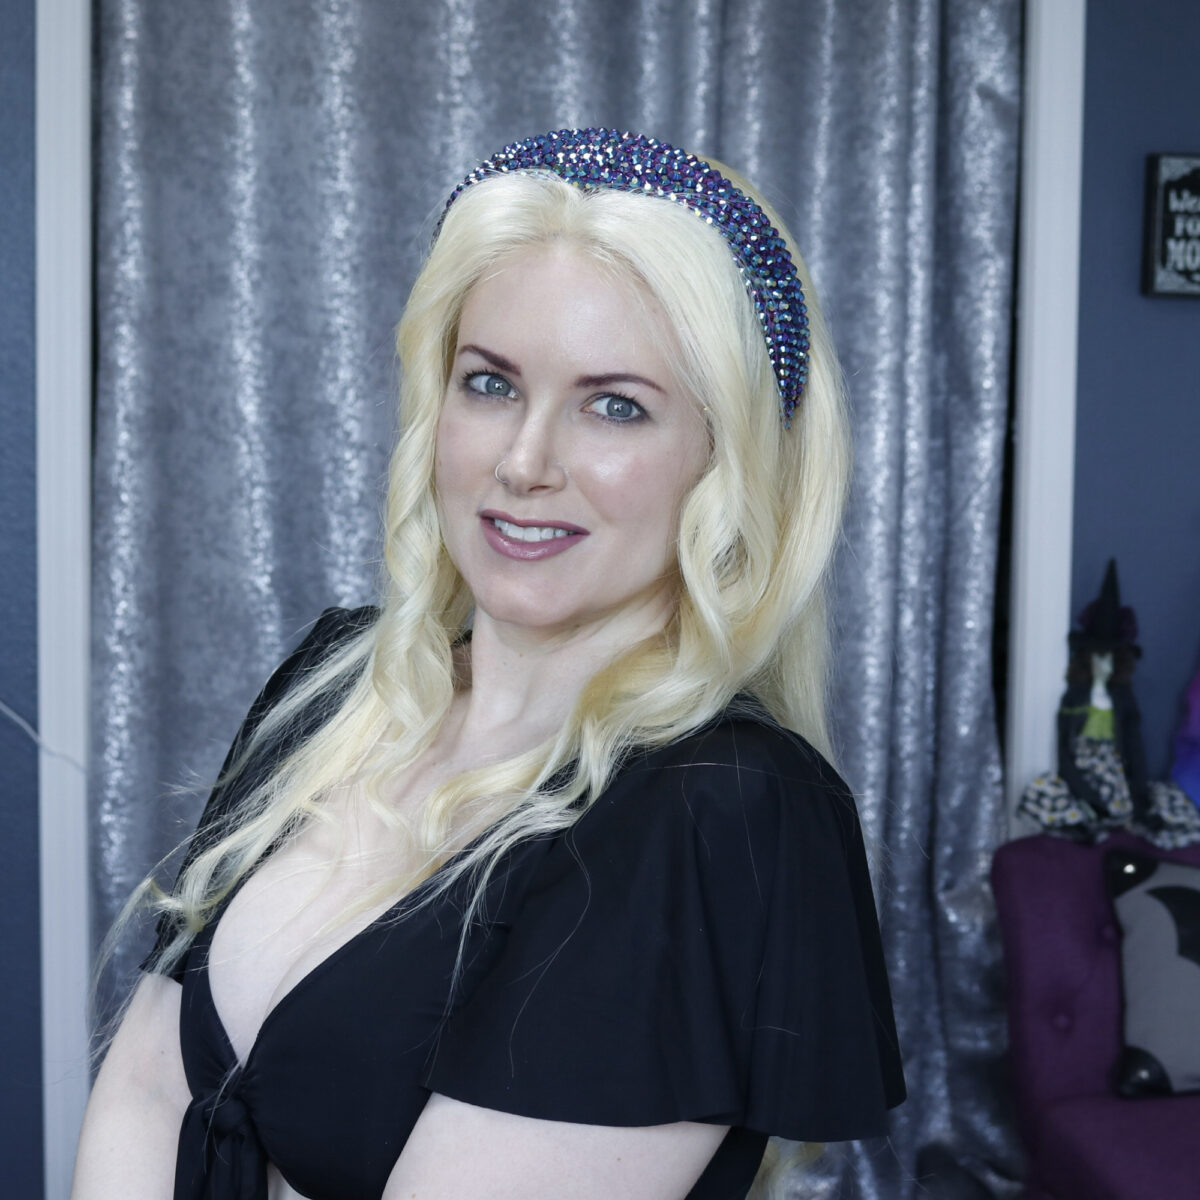 Cordelia is wearing the Irresistible Me Front Lace Human Wig 24" platinum blonde